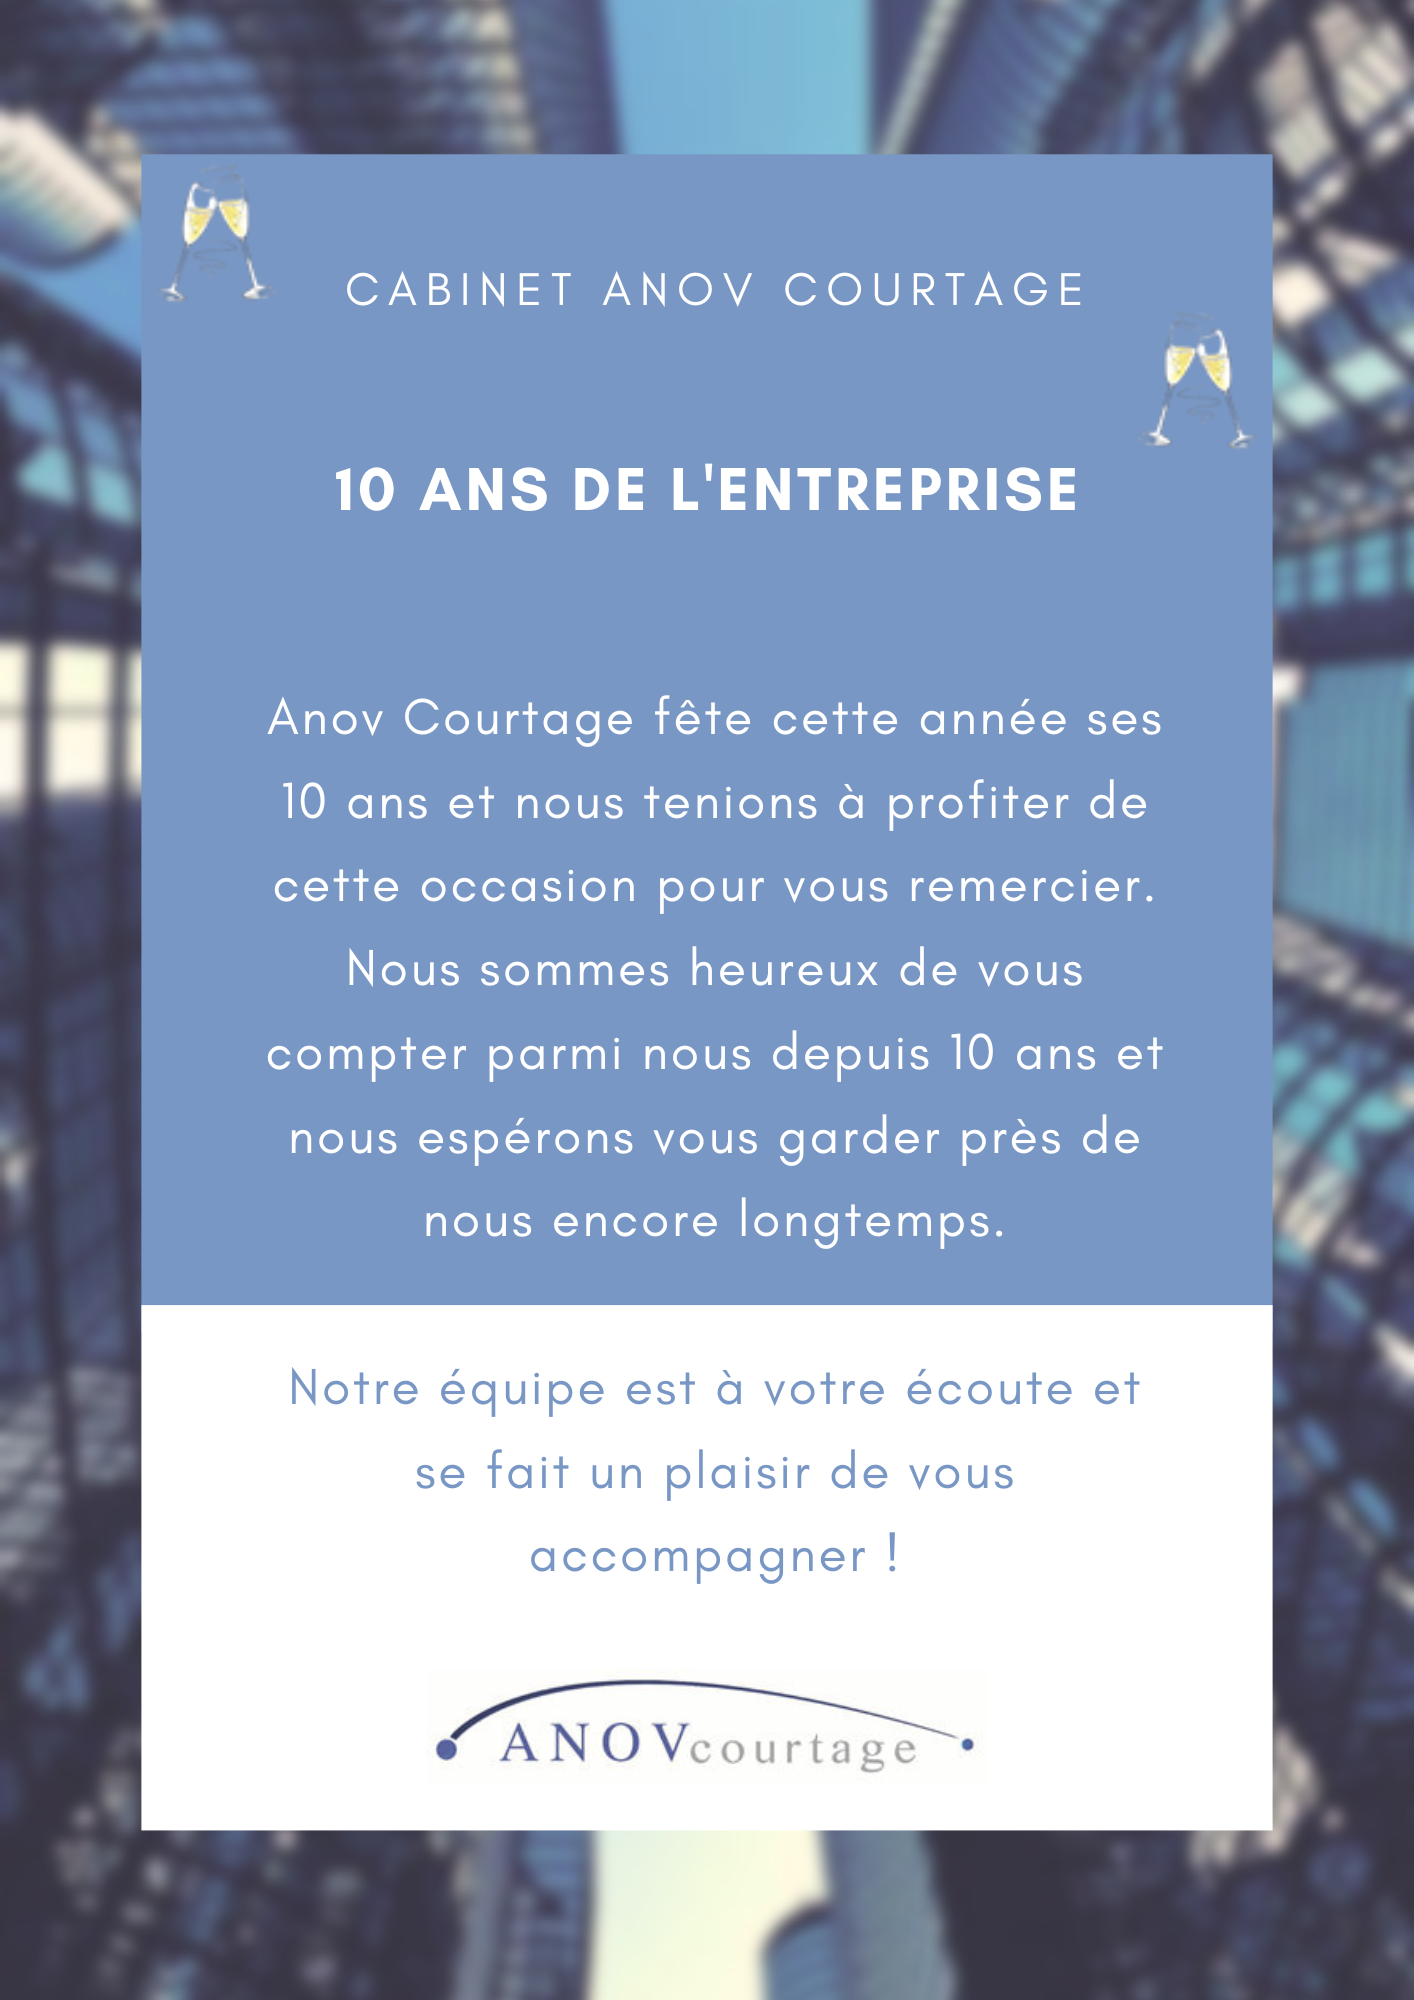 10 ans d’Anov Courtage